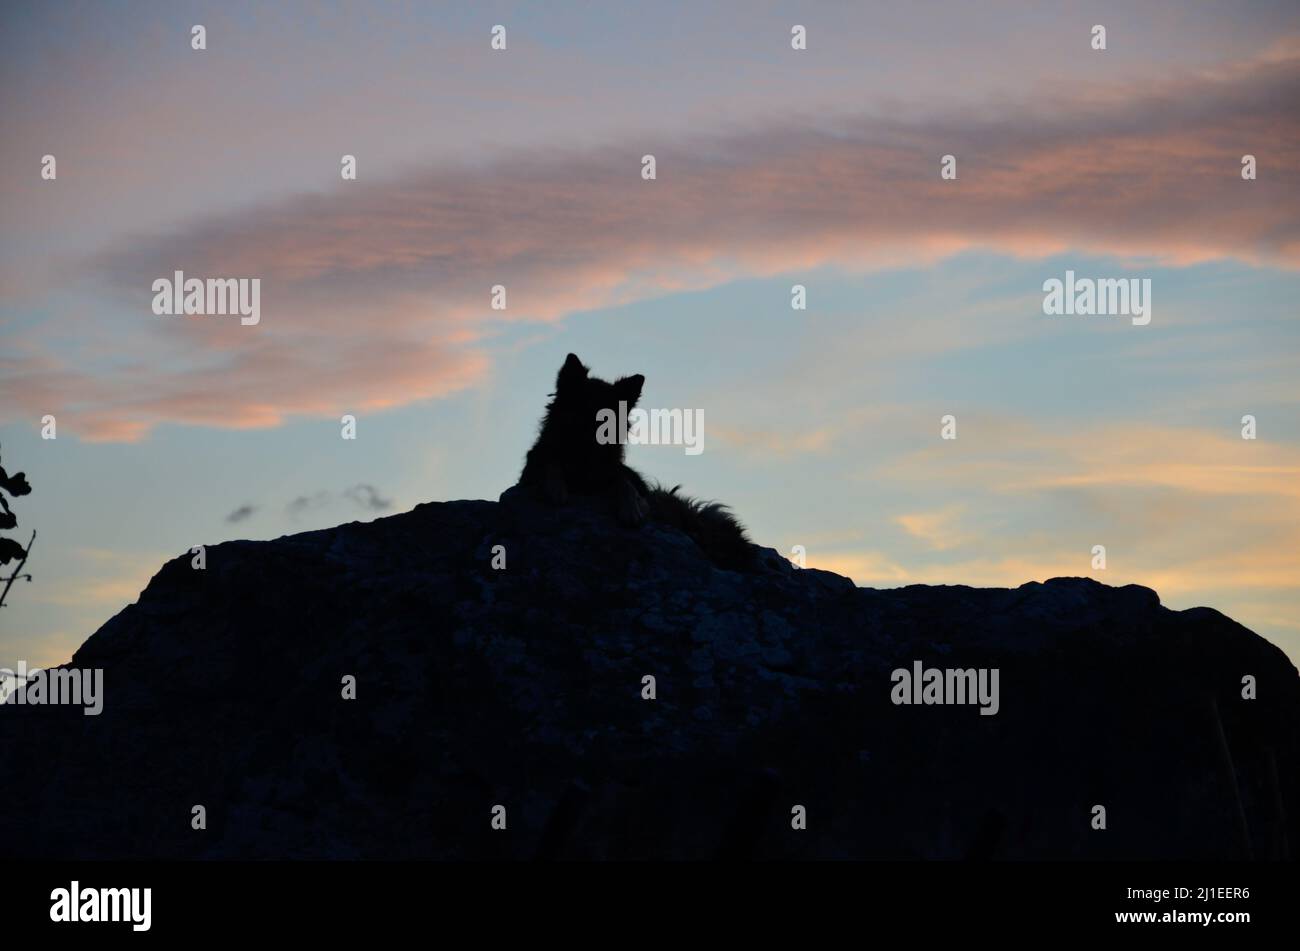 The dark silhouette of a street dog lying on a rock watching the sunset on the island of Sardinia Stock Photo